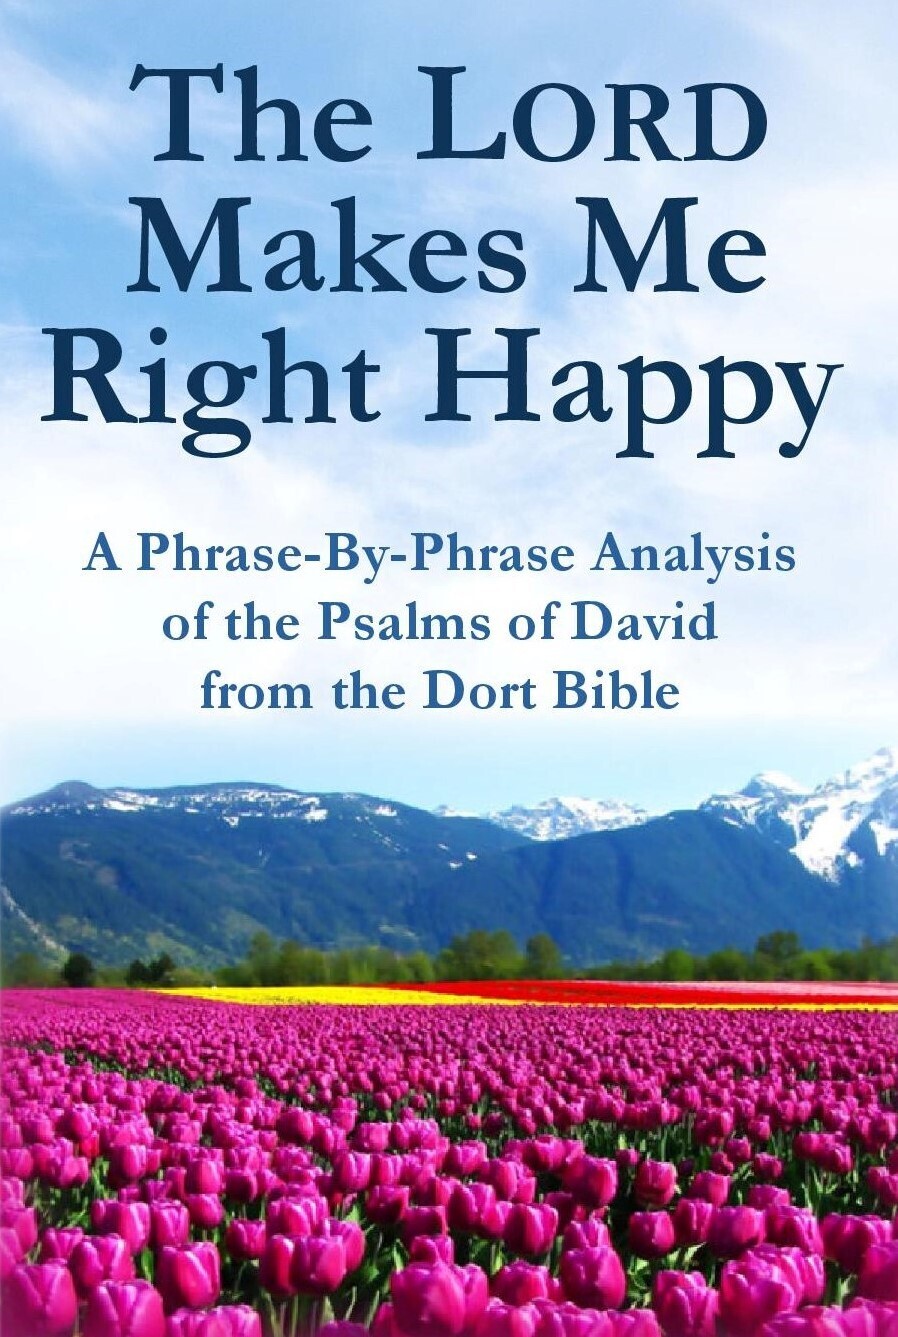 The Lord Makes Me Right Happy: A Phrase-By-Phrase Analysis of the Psalms of David from the Dort Bible